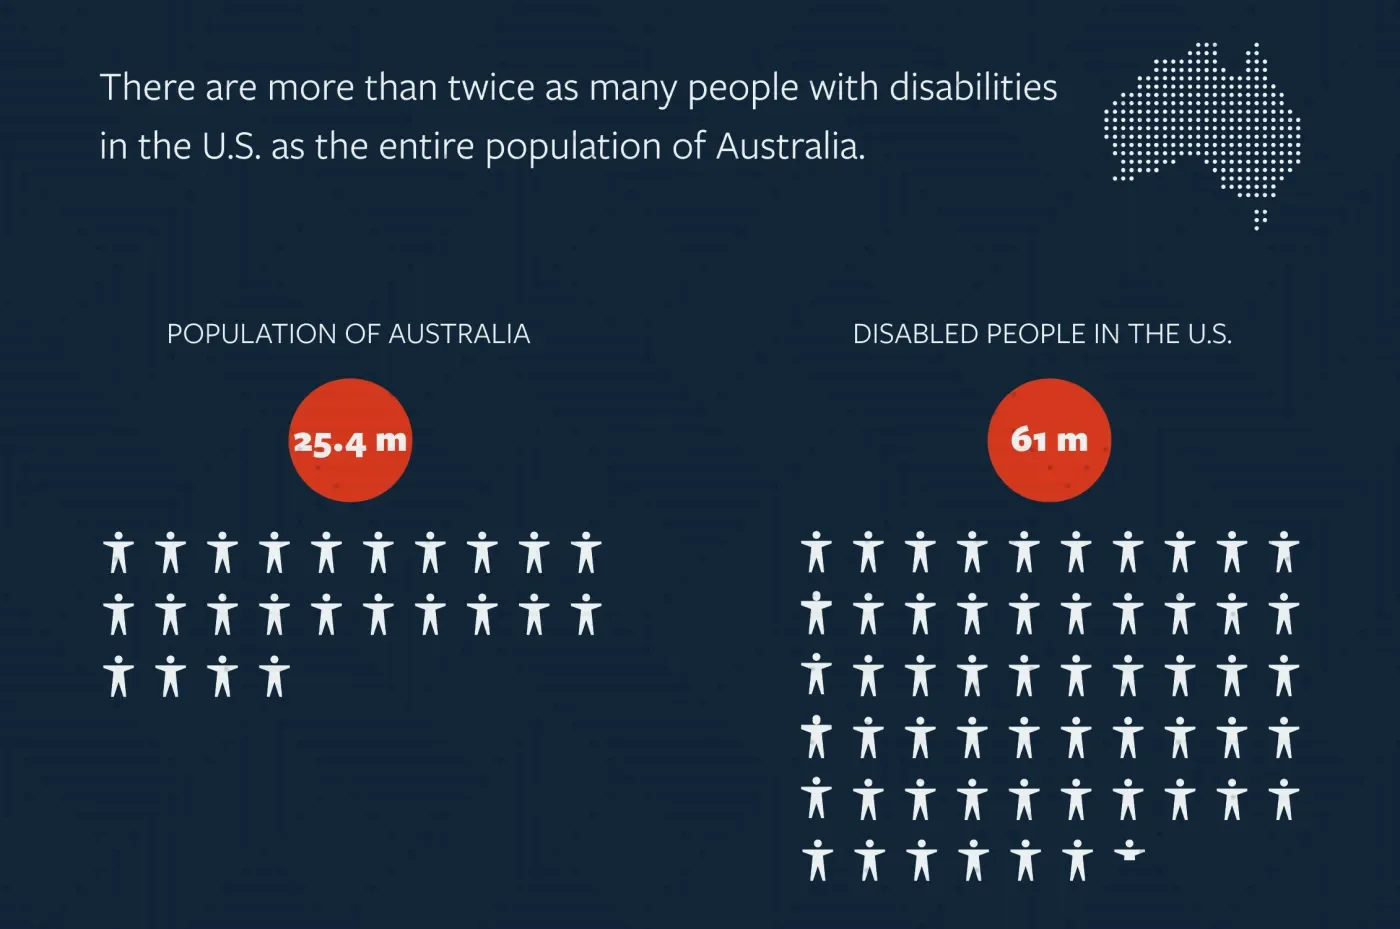 Graphic showing 61 million disabled people in the United States, and a total population of 25 million in Australia